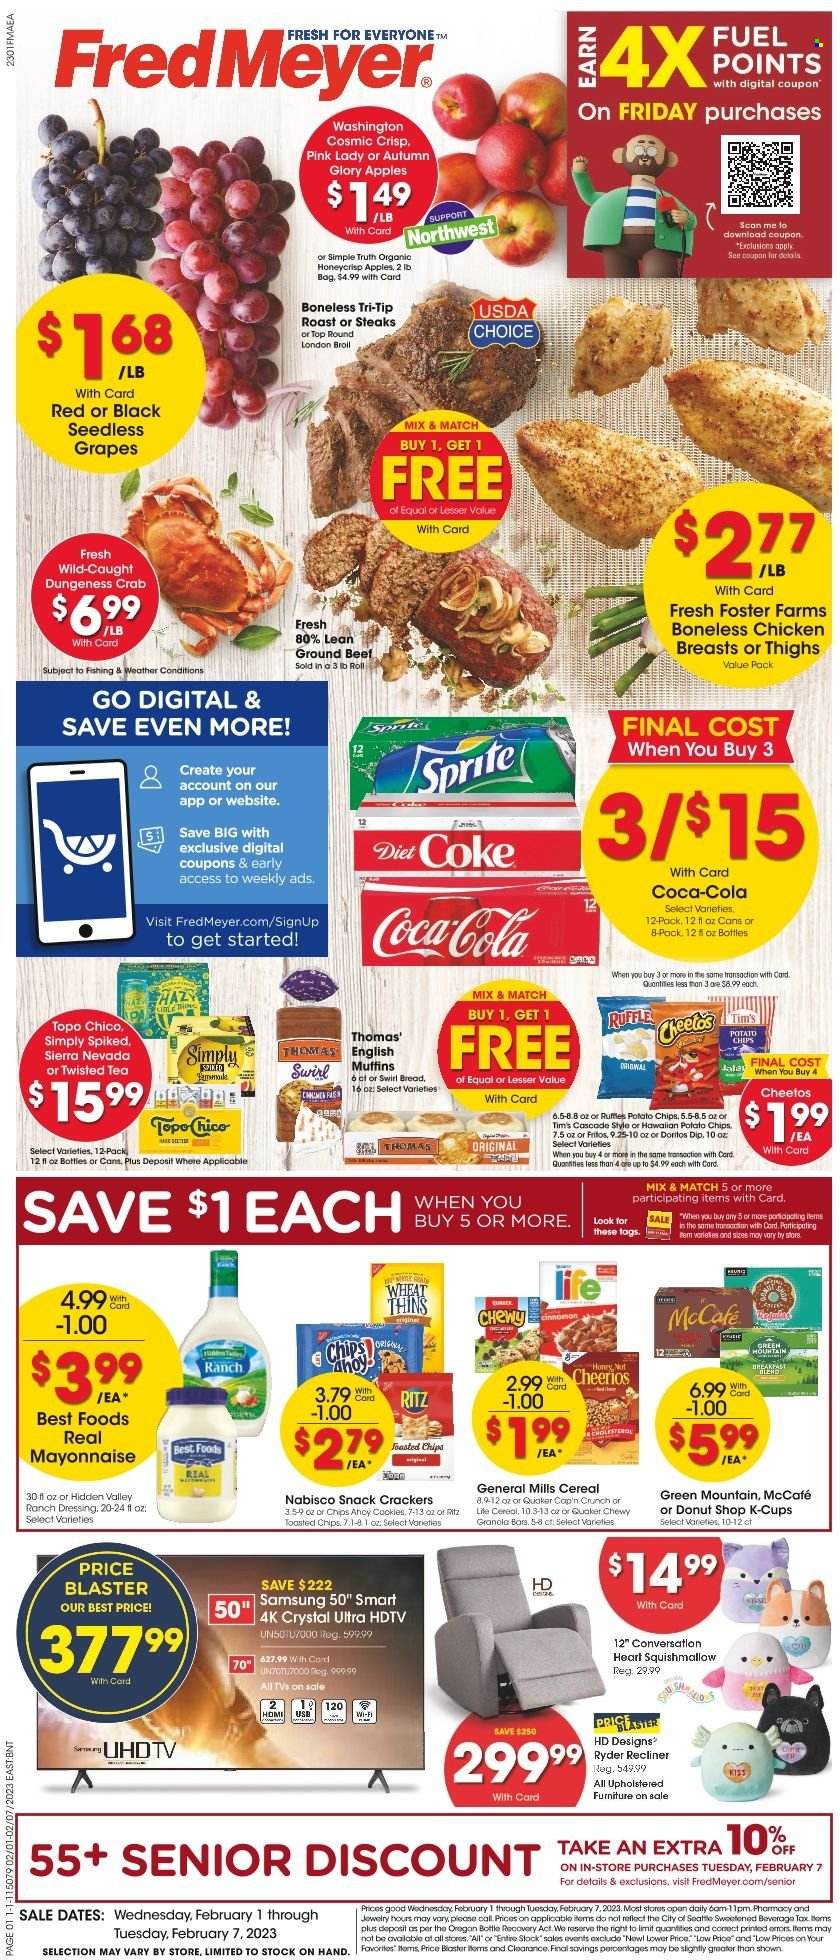 thumbnail - Fred Meyer Flyer - 02/01/2023 - 02/07/2023 - Sales products - english muffins, apples, grapes, seedless grapes, Pink Lady, crab, Quaker, mayonnaise, ranch dressing, dip, cookies, snack, crackers, RITZ, Doritos, Fritos, potato chips, Cheetos, chips, Thins, Ruffles, cereals, Cheerios, granola bar, Cap'n Crunch, dressing, Coca-Cola, Sprite, Diet Coke, tea, coffee capsules, McCafe, K-Cups, Green Mountain, beer, chicken breasts, beef meat, ground beef, steak, Cascade, Samsung, UHD TV, HDTV, TV, recliner chair, jewelry, Squishmallows, Twisted Tea. Page 1.